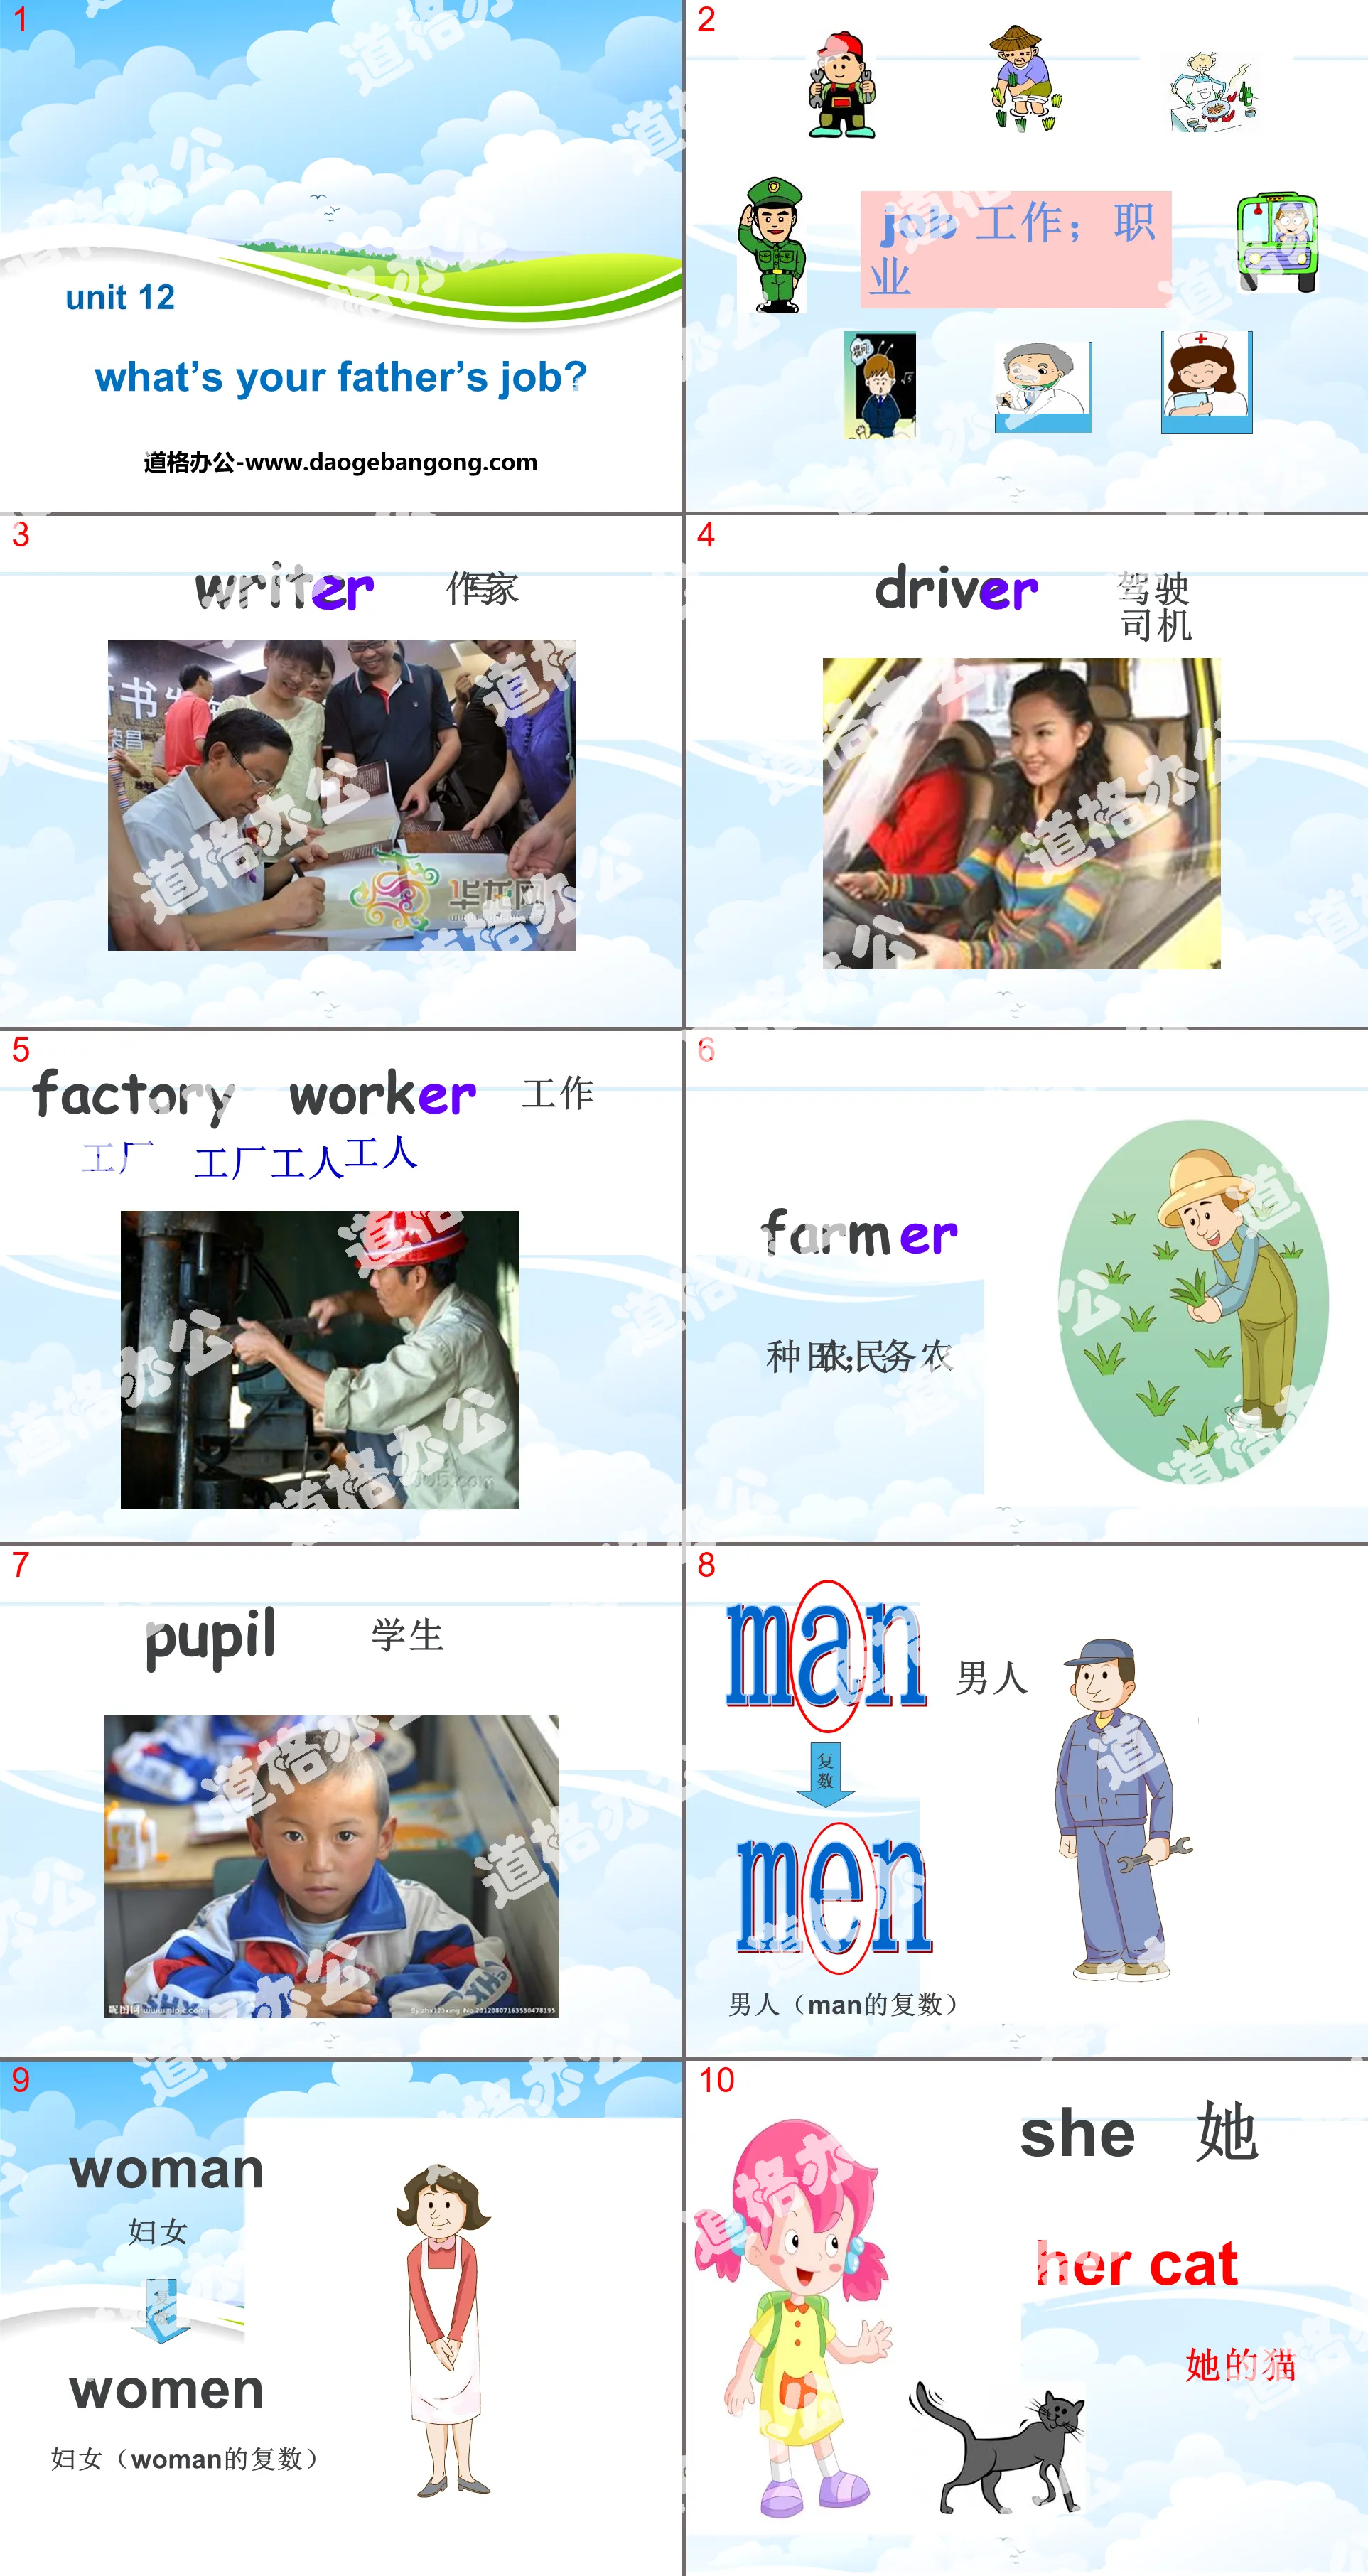 《What's your father's job?》PPT课件
